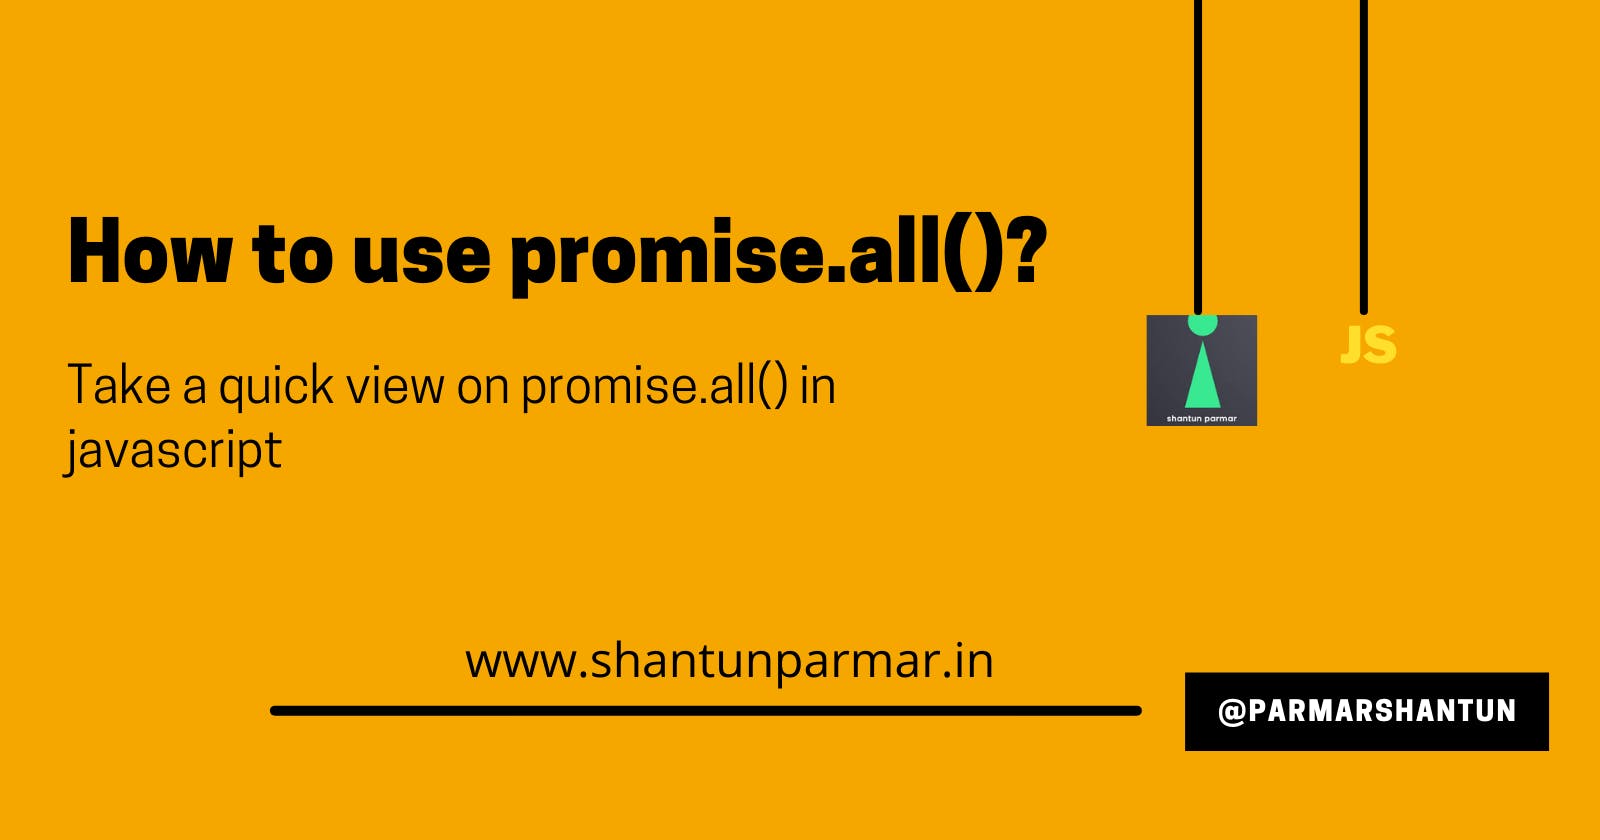 What is promise.all() and how to use it?